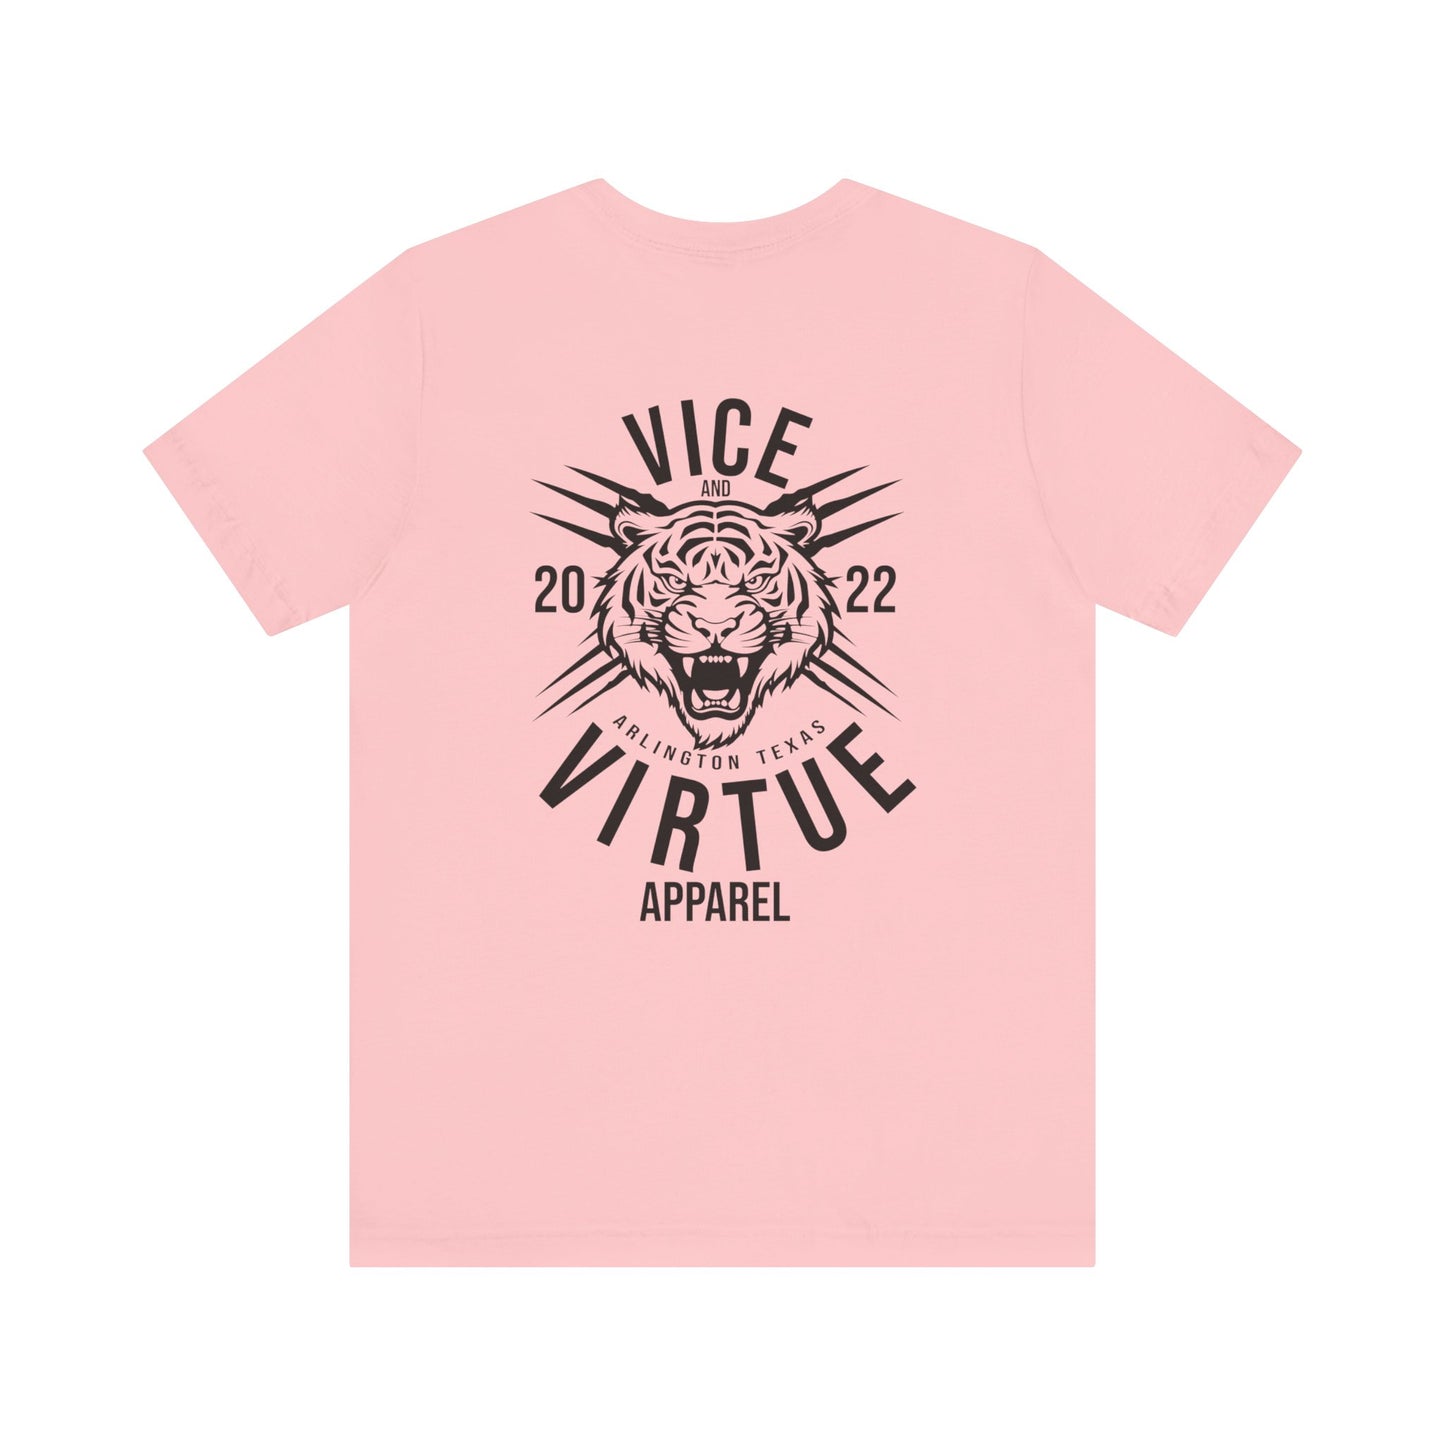 Vice and Virtue TX Tee